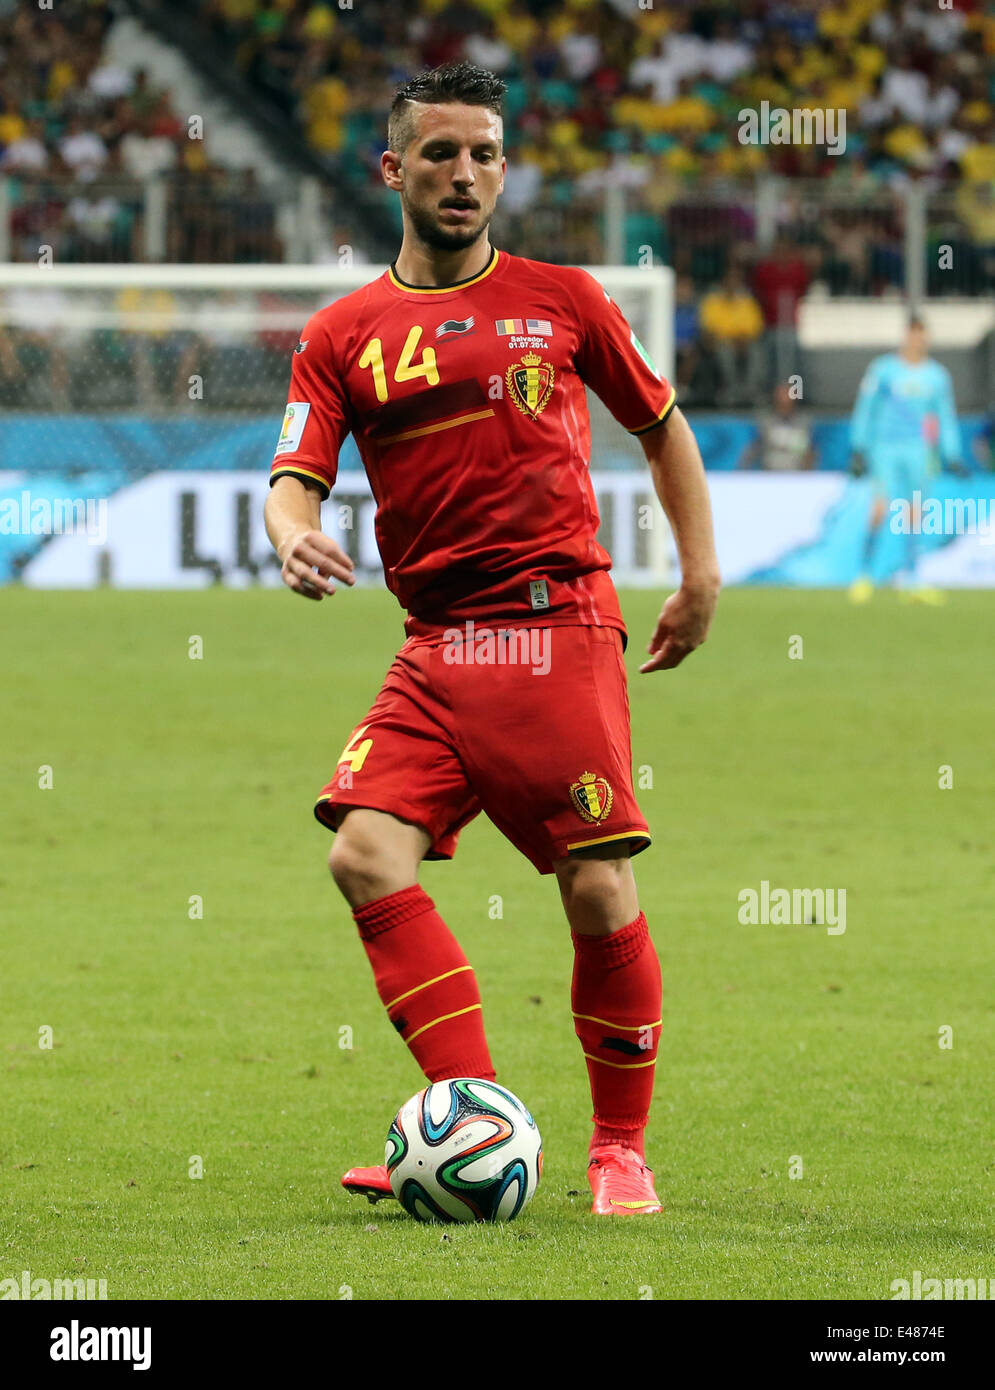 01.07.2014. Salvador, Brazil. FIFA World Cup Football, 2nd round, knock-out stage. Belgium versus USA.  Dries Mertens (Belgium) Stock Photo